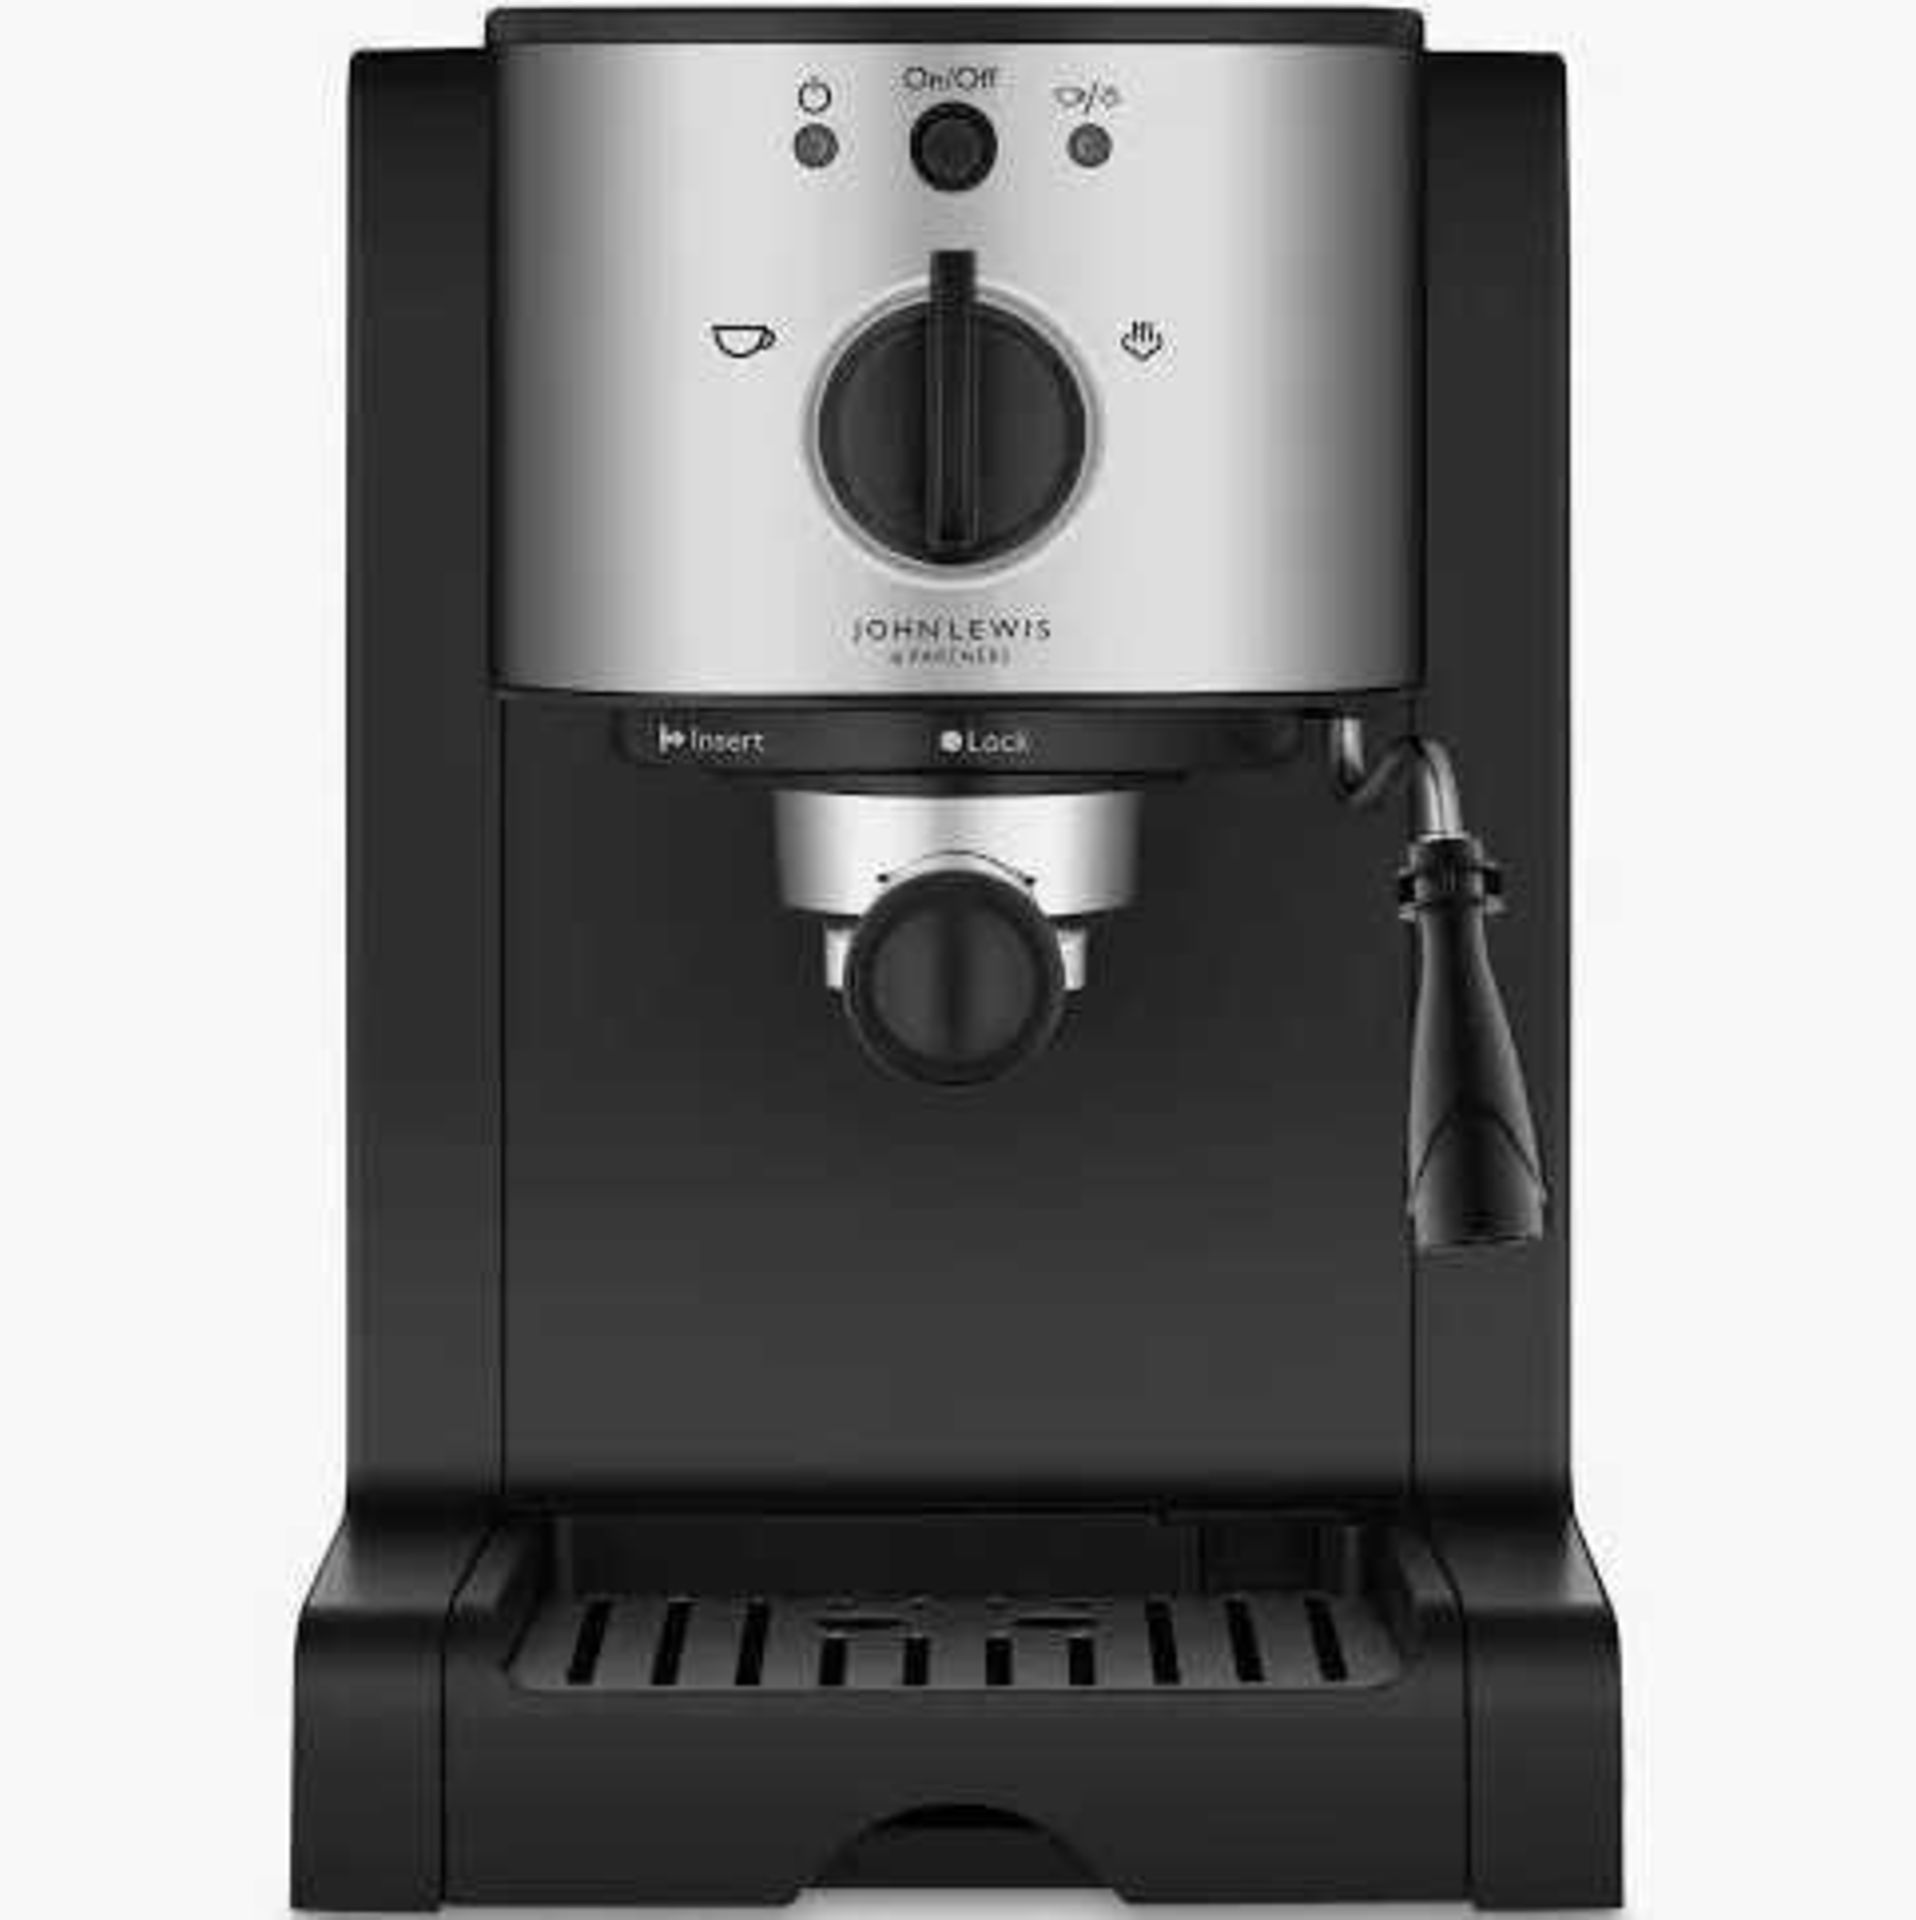 RRP £170 Unboxed X3 Items Including John Lewis Coffee Machine(Cr2) - Image 2 of 3